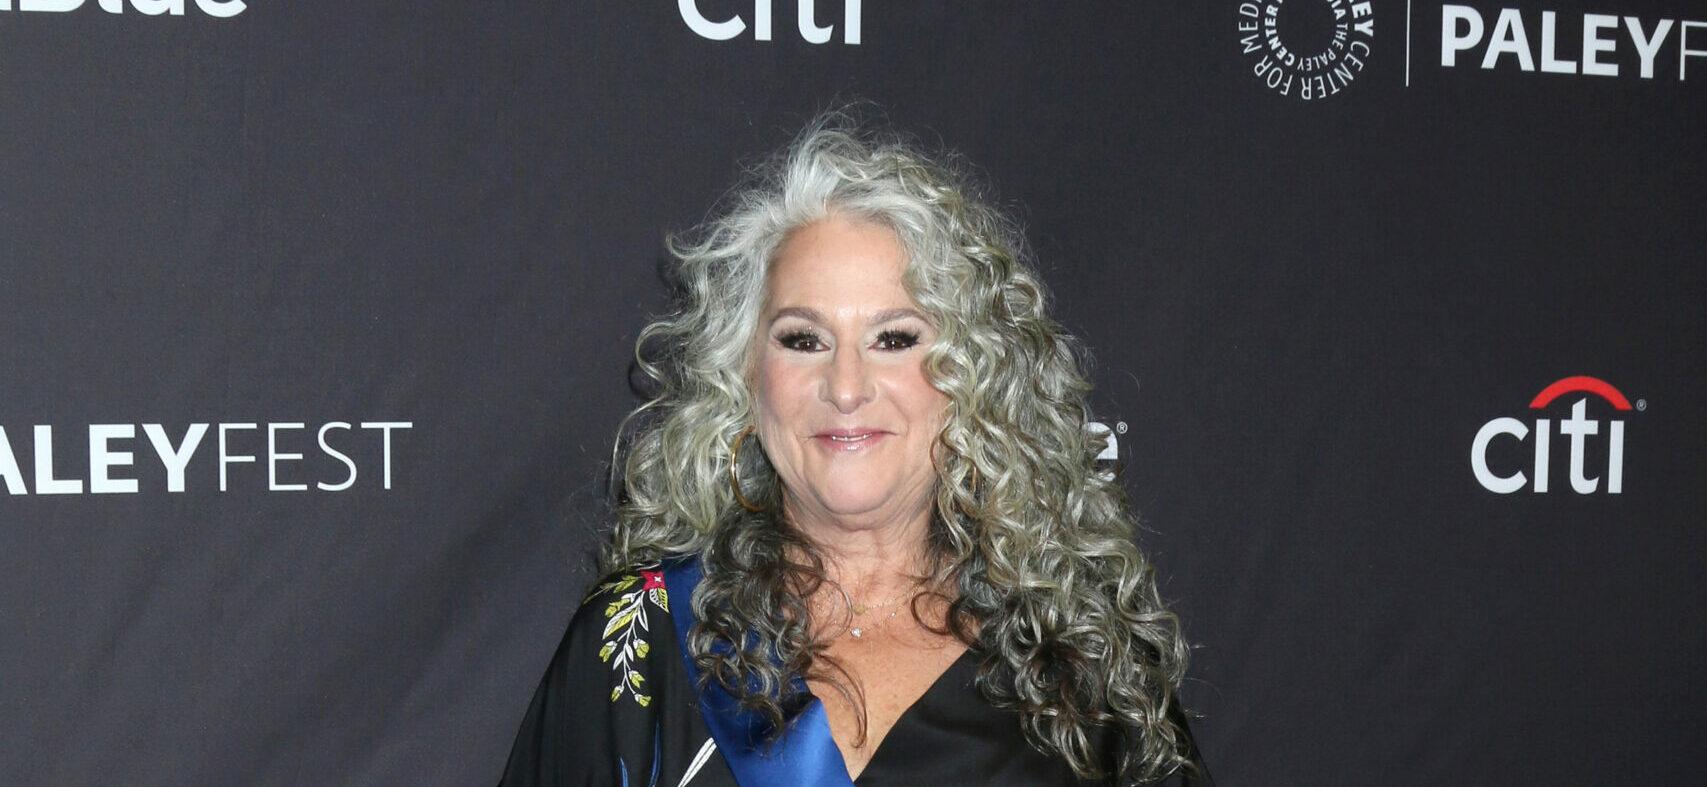 Marta Kauffman at the PaleyFest - "Grace and Frankie" Event at the Dolby Theater on March 16, 2019 in Los Angeles, CA